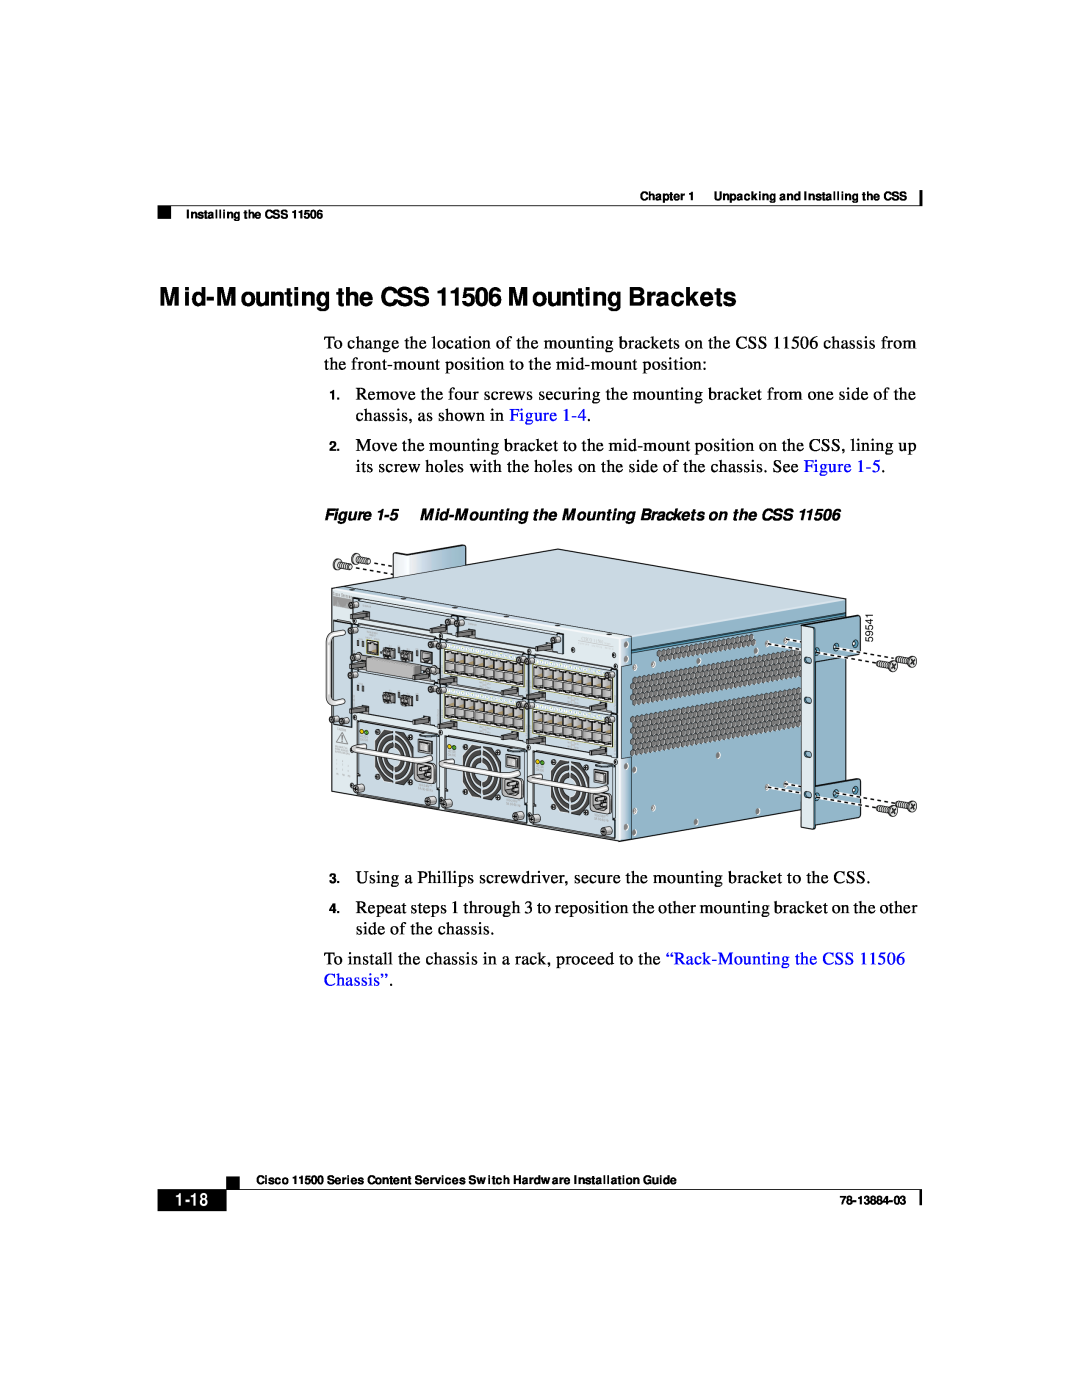 Cisco Systems 11500 Series manual Mid-Mounting the CSS 11506 Mounting Brackets, 1-18 